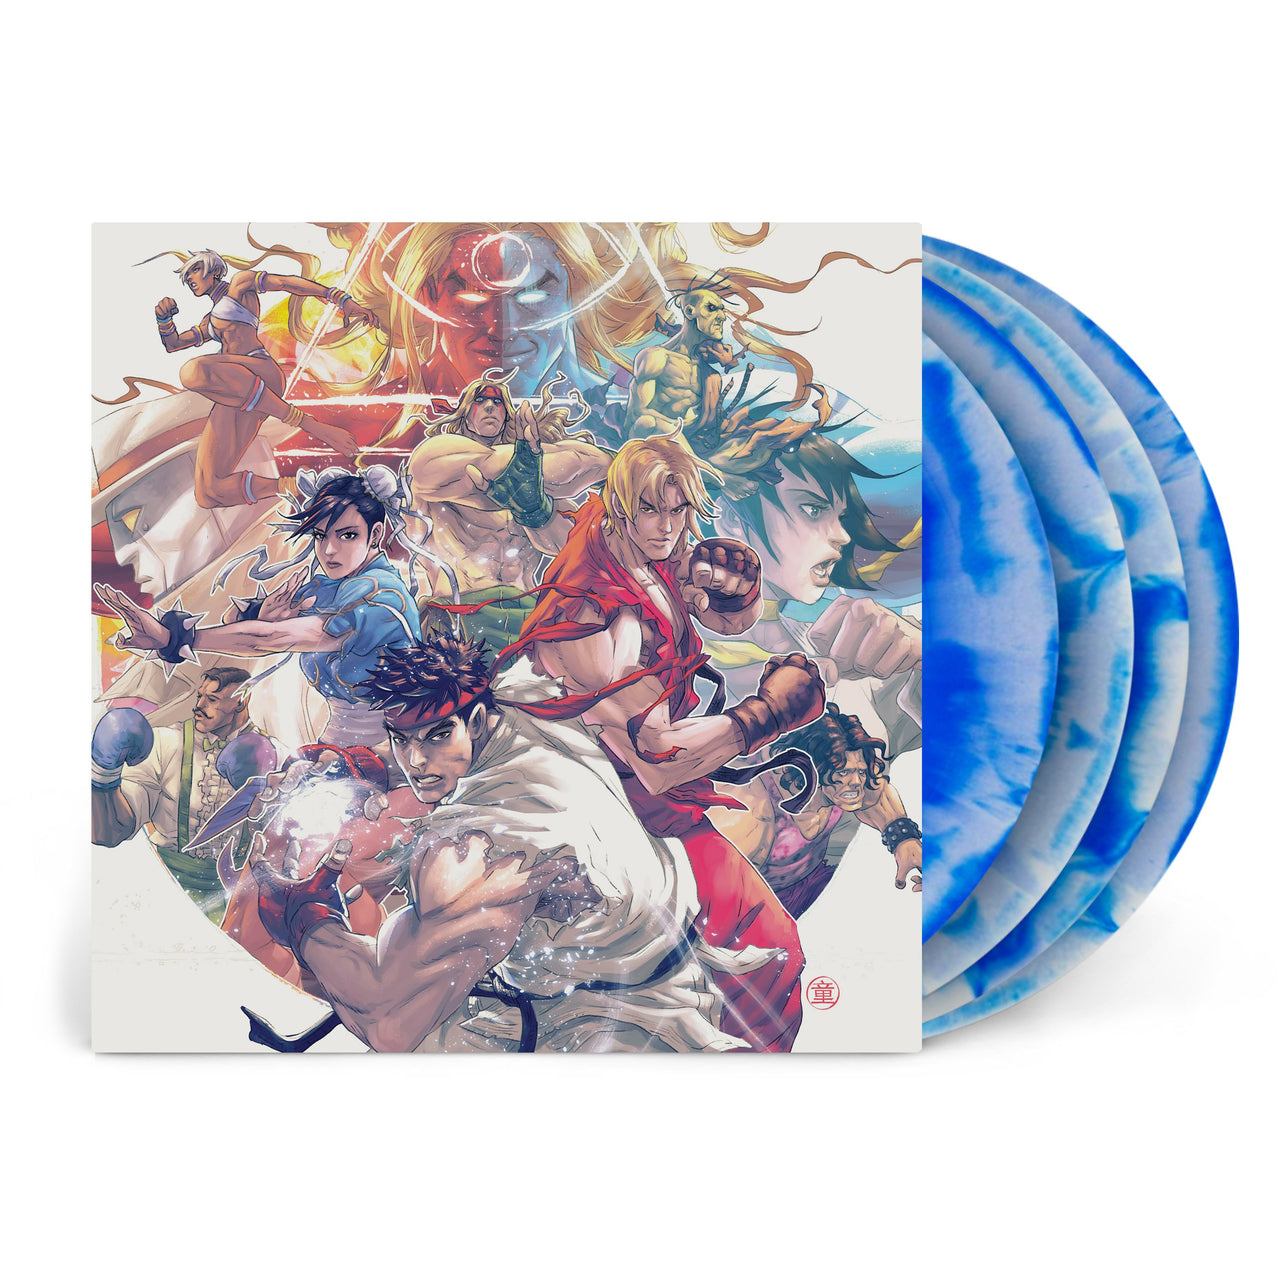 Street Fighter III: The Collection (Limited Edition Deluxe X4LP Boxset)